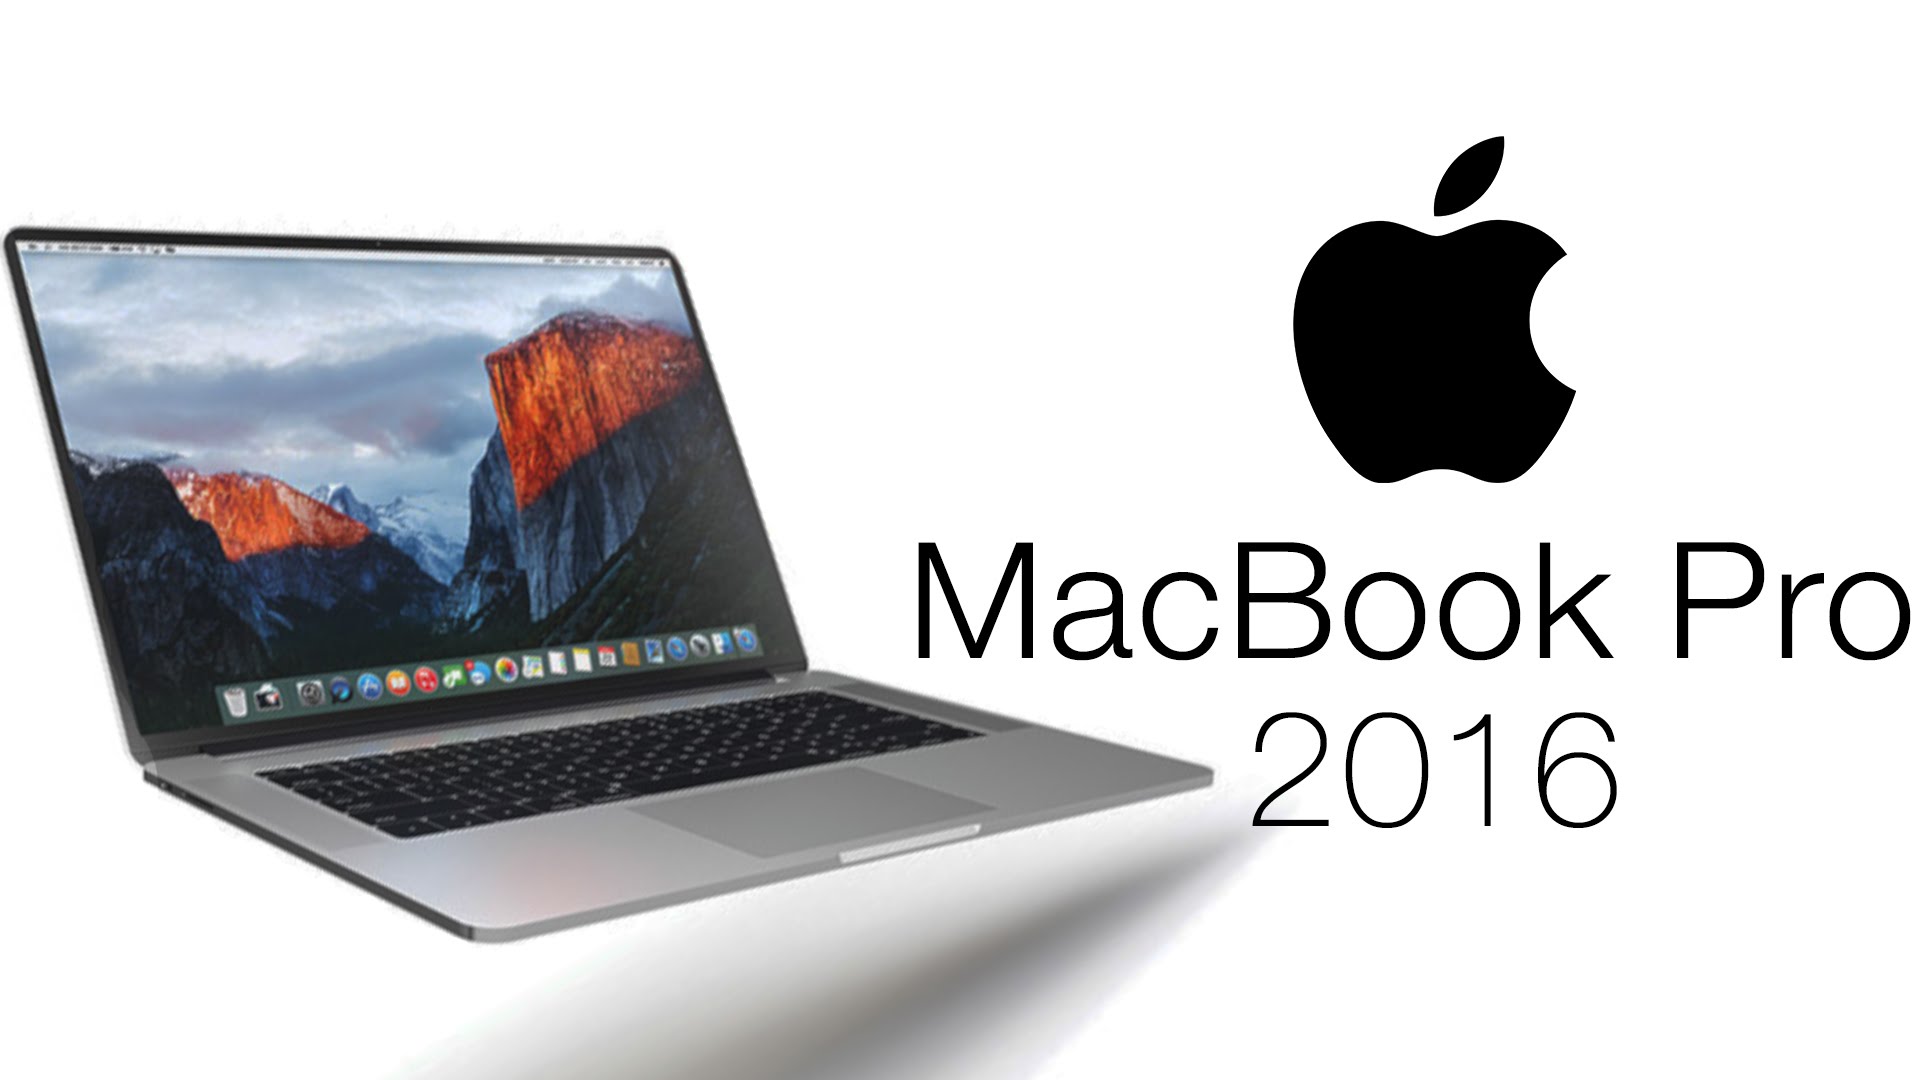 Leaked photo of new MacBook Pro 2016, to be launched at October 27 Mac event